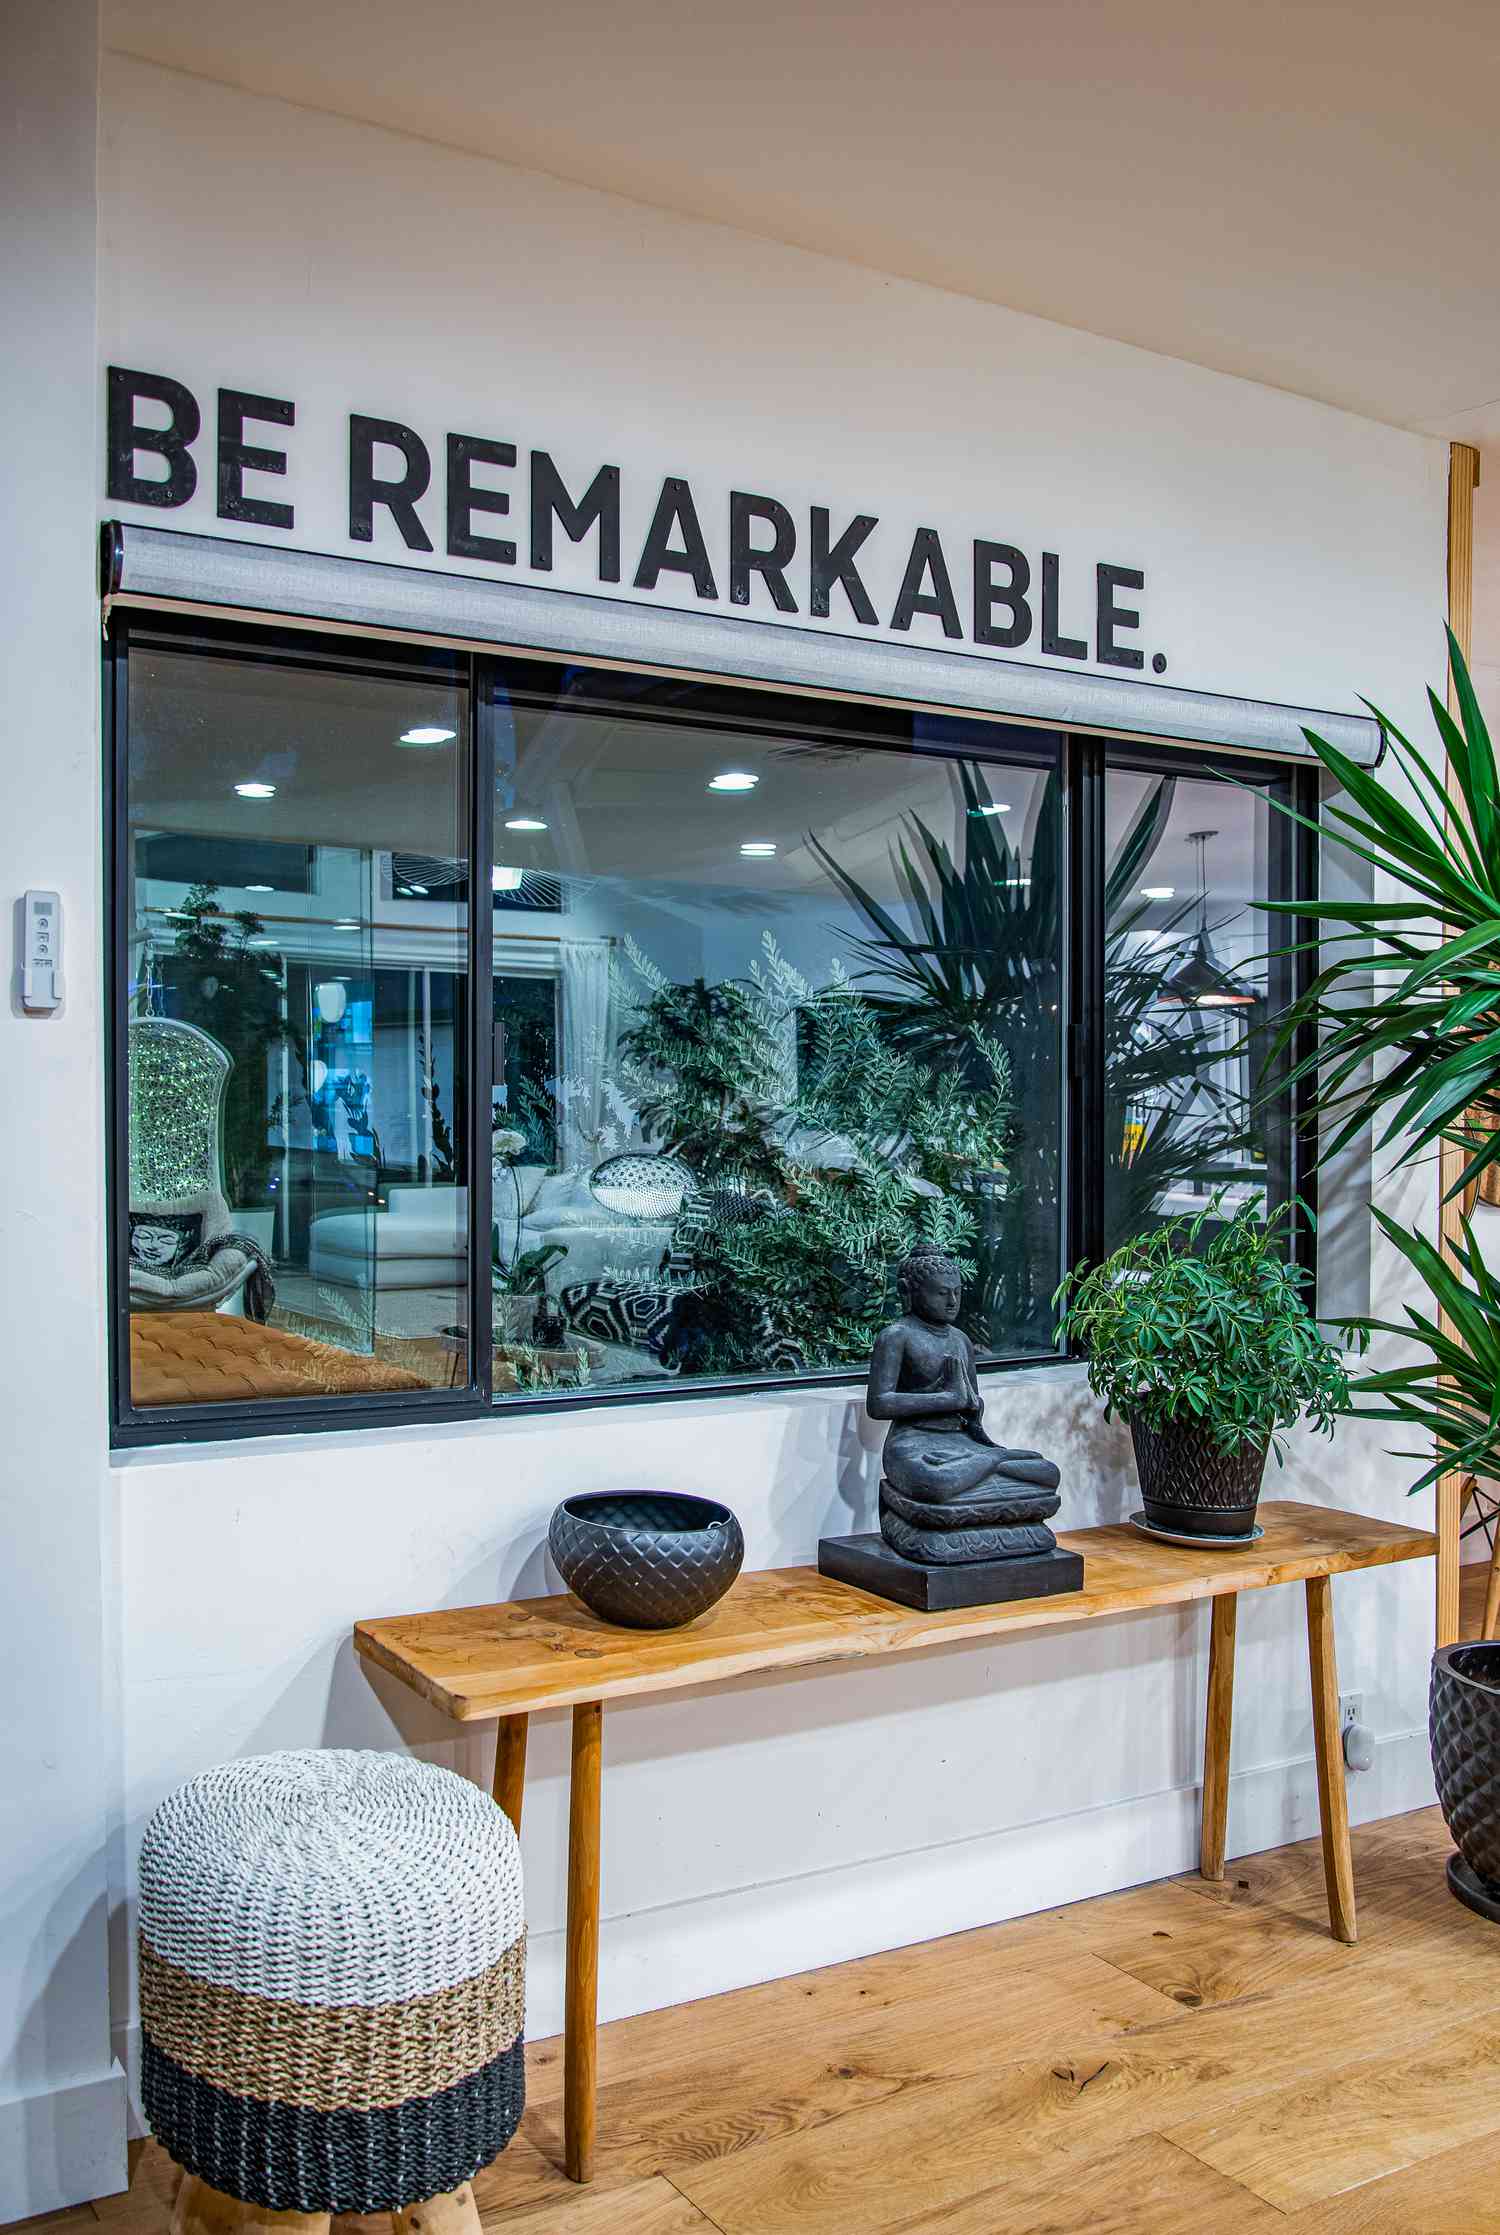 Be remarkable decal on a wall above a window